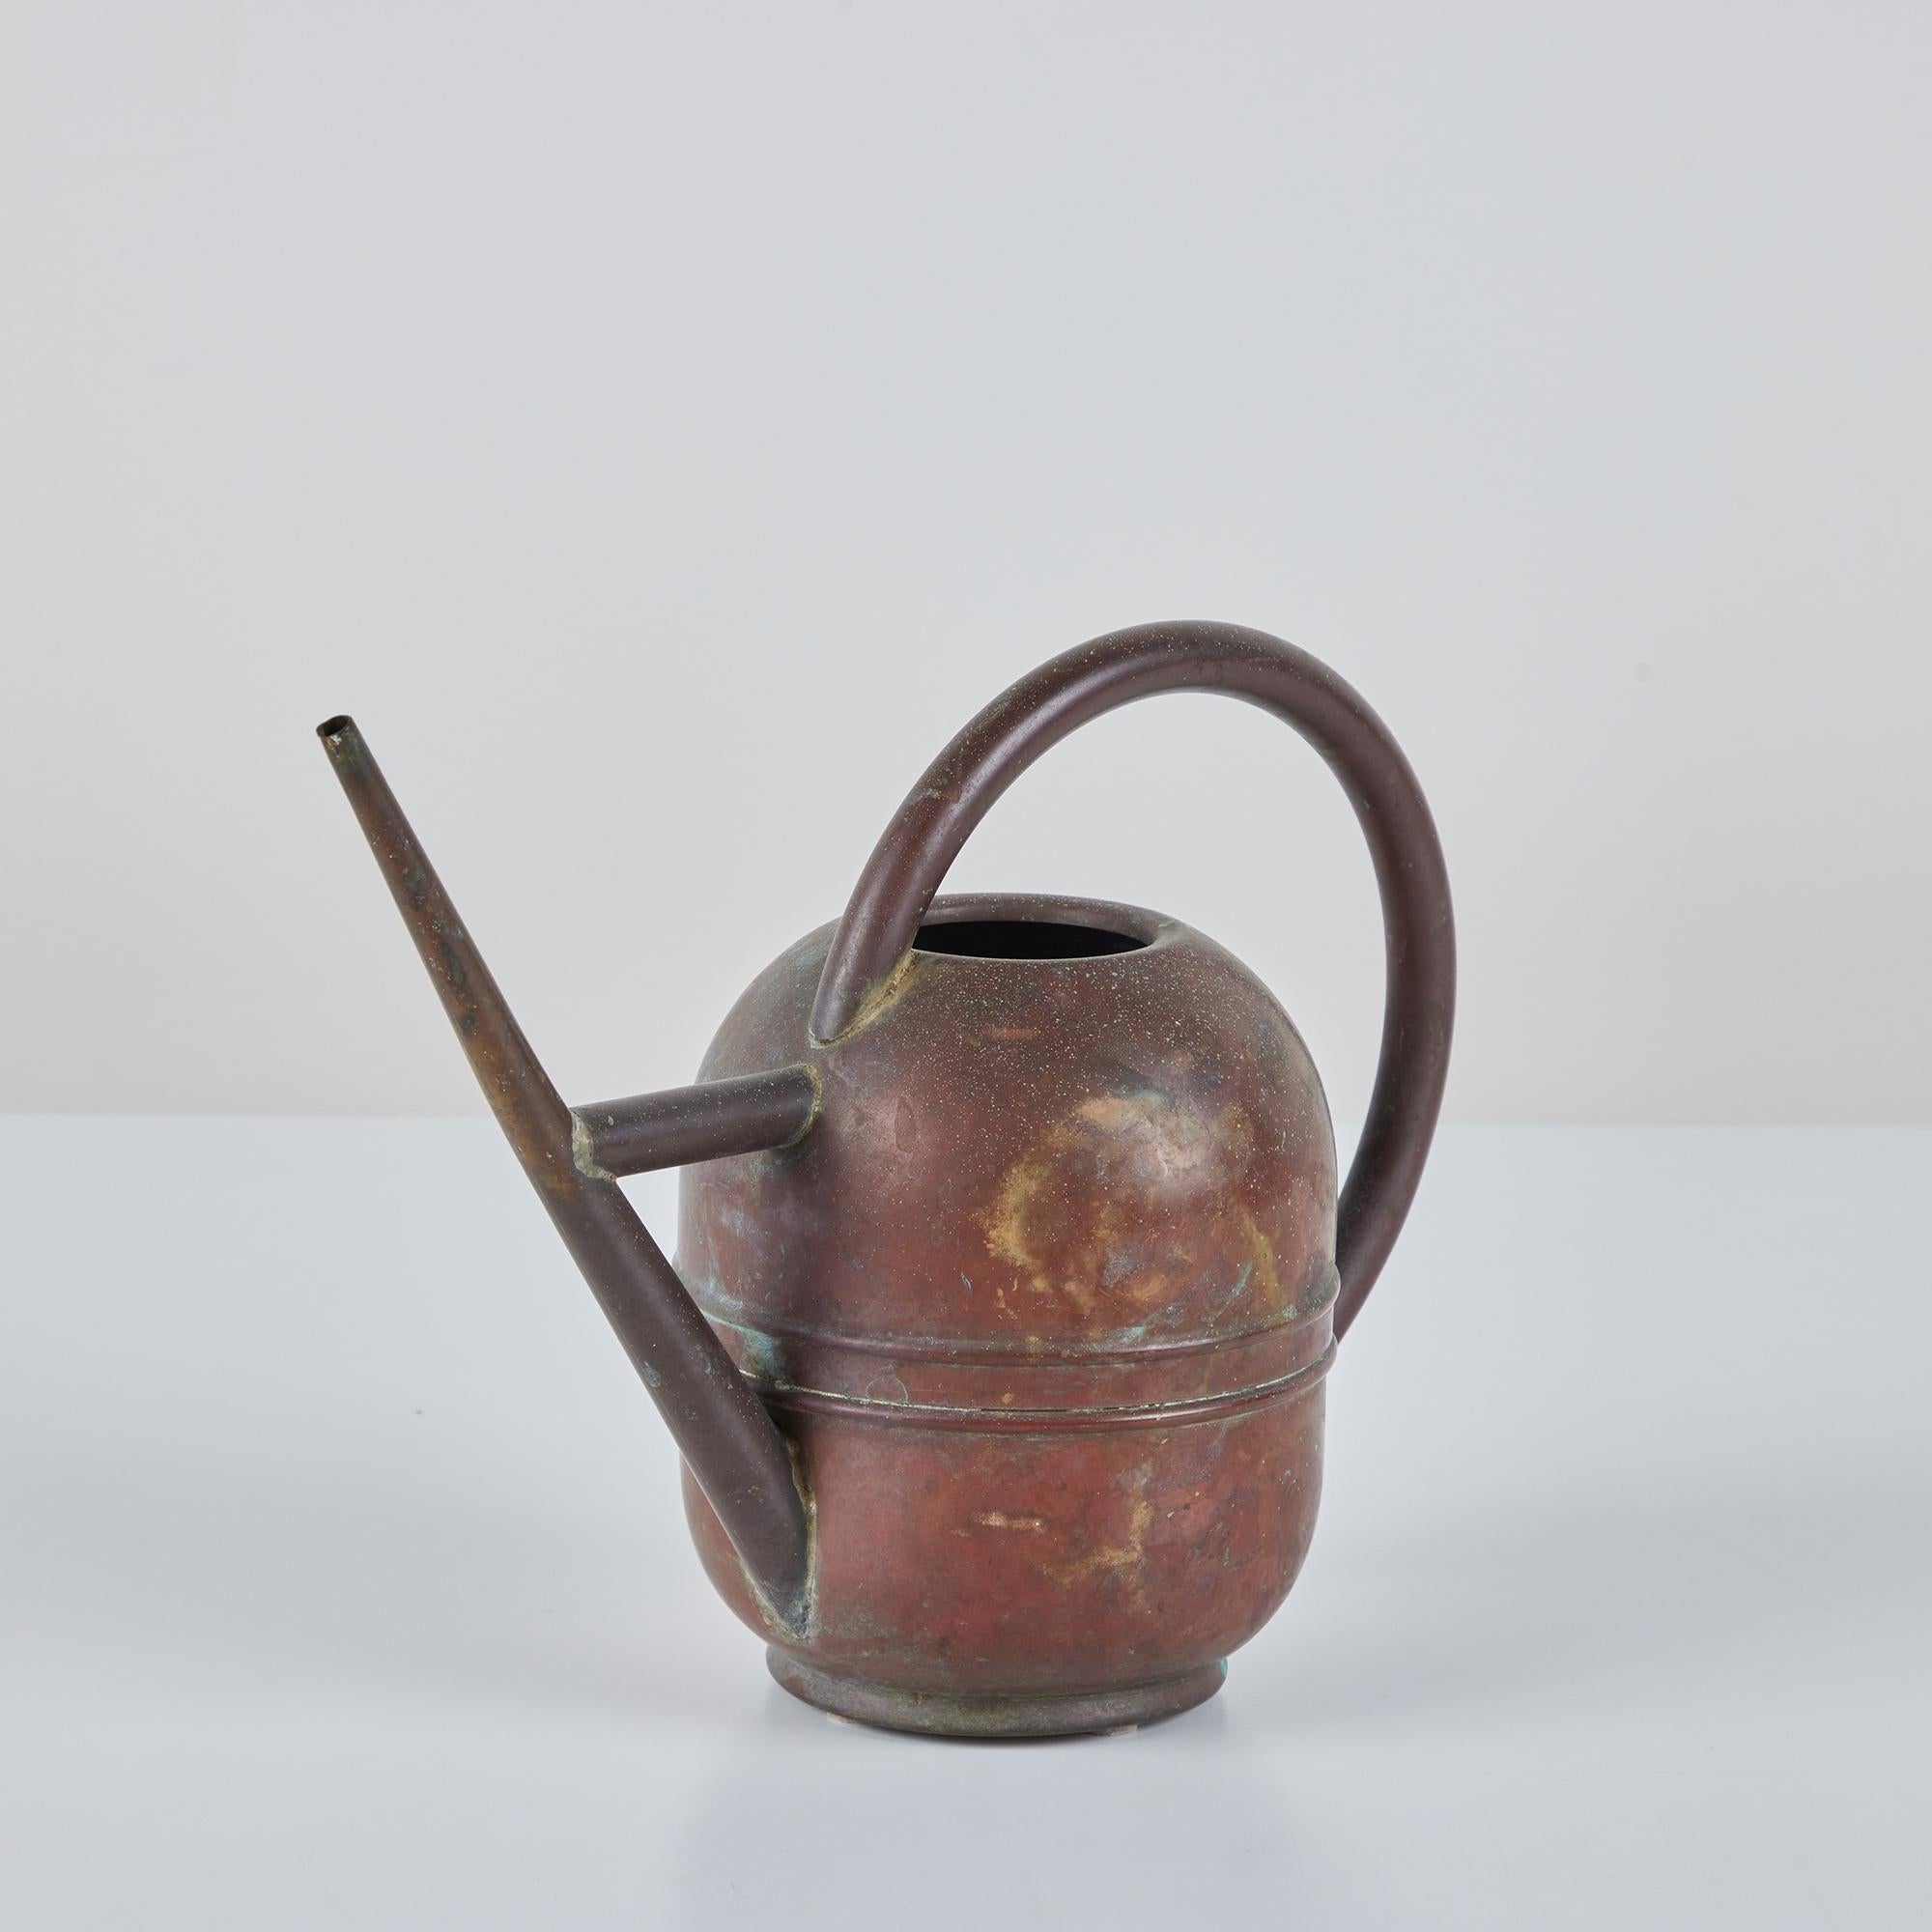 Art Deco copper and brass watering can circa 1930s, Chase USA. This piece features a copper body and brass handle and spout. Vessel is impressed with [Chase USA] and feature the Chase Centaur Archer logo on the underside.

The Chase Brass and